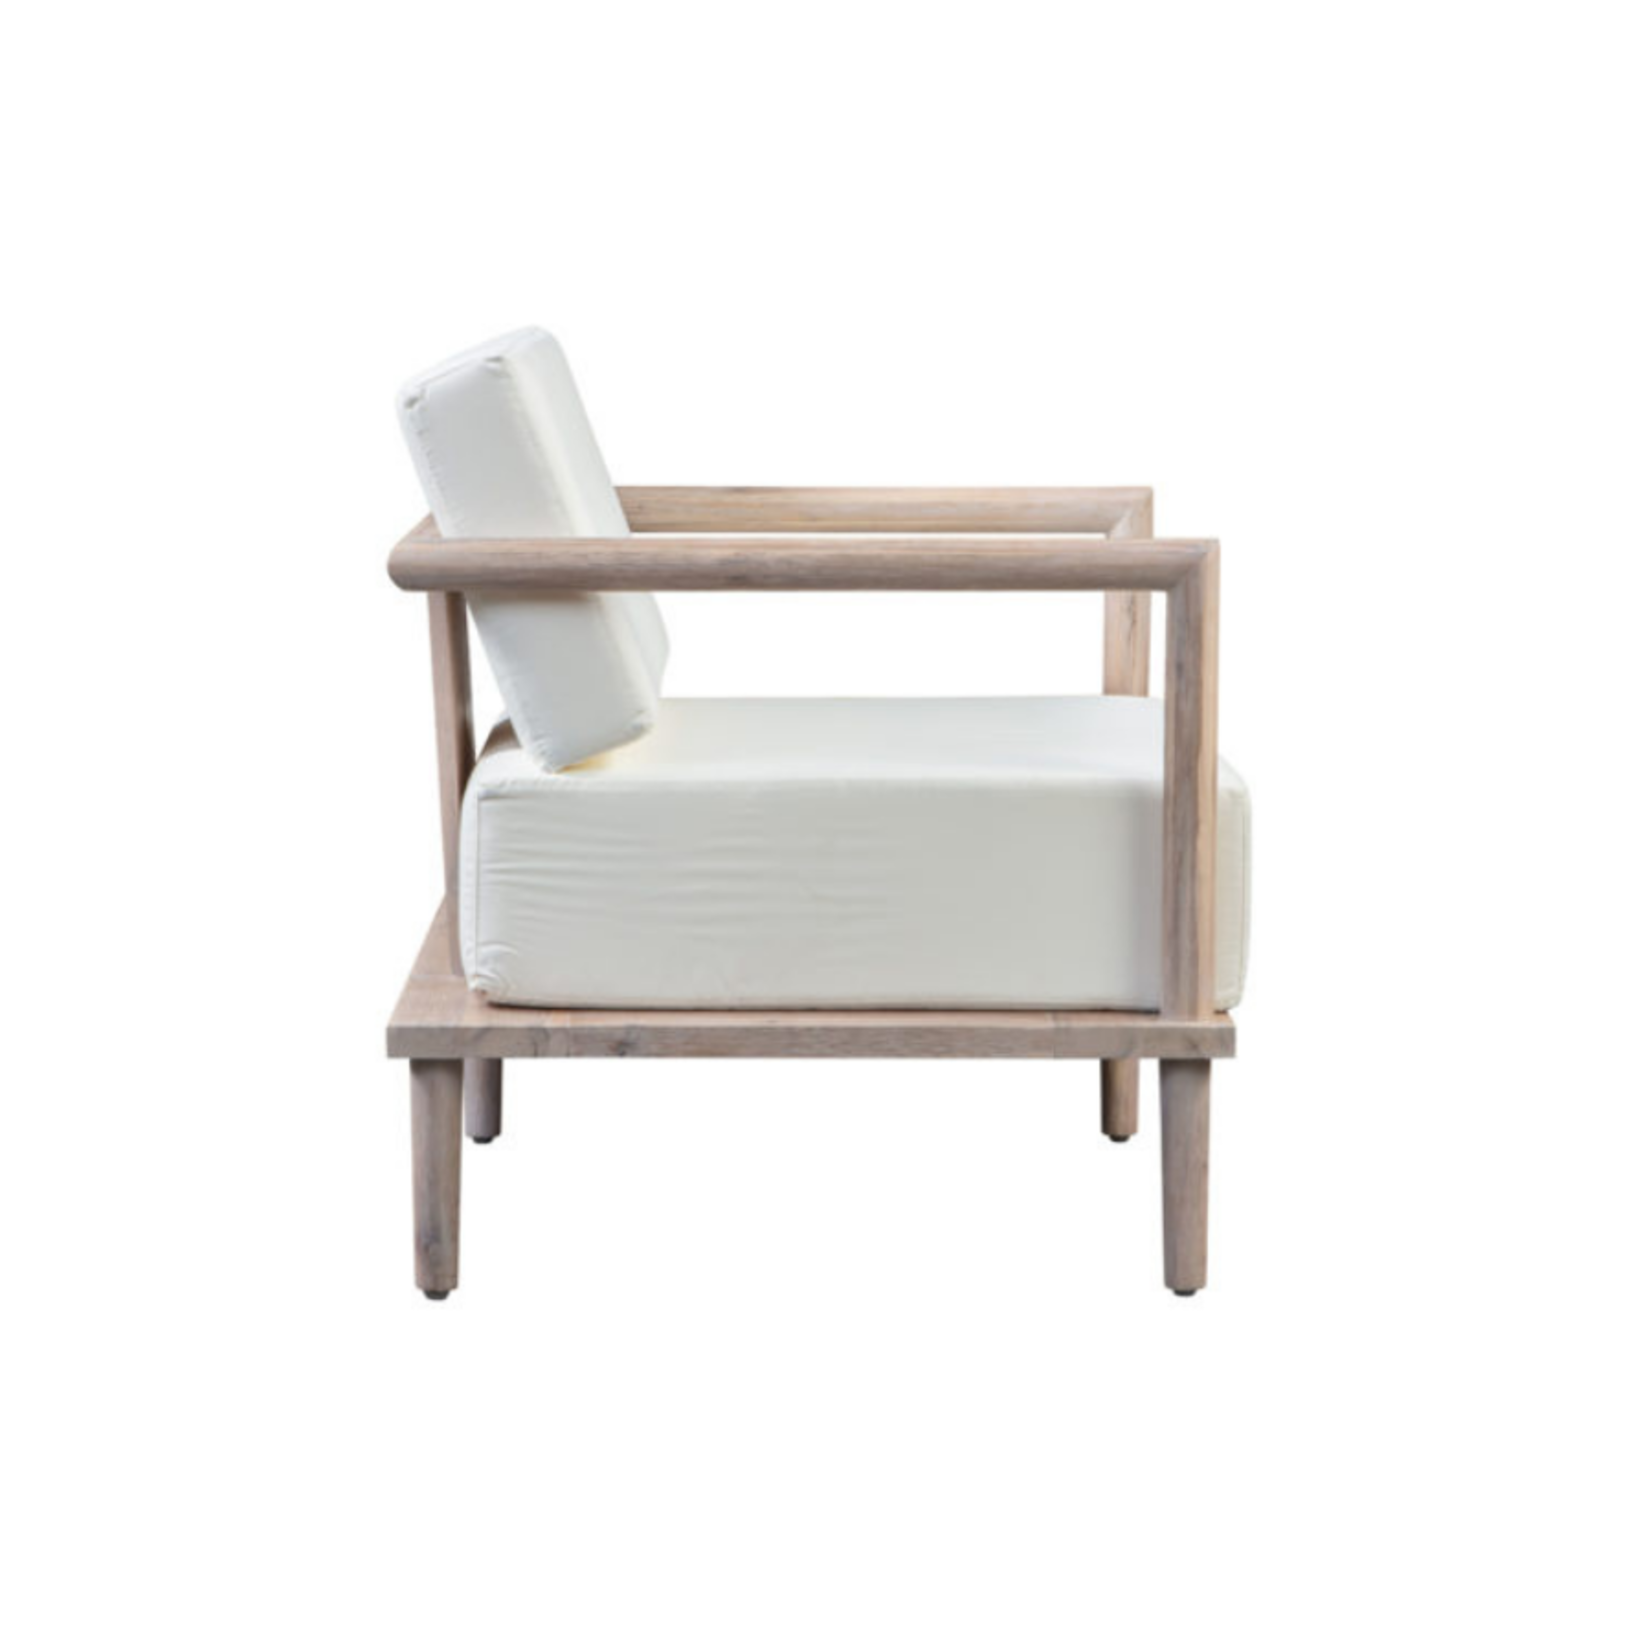 Tov Noelle Lounge Chair | Outdoor